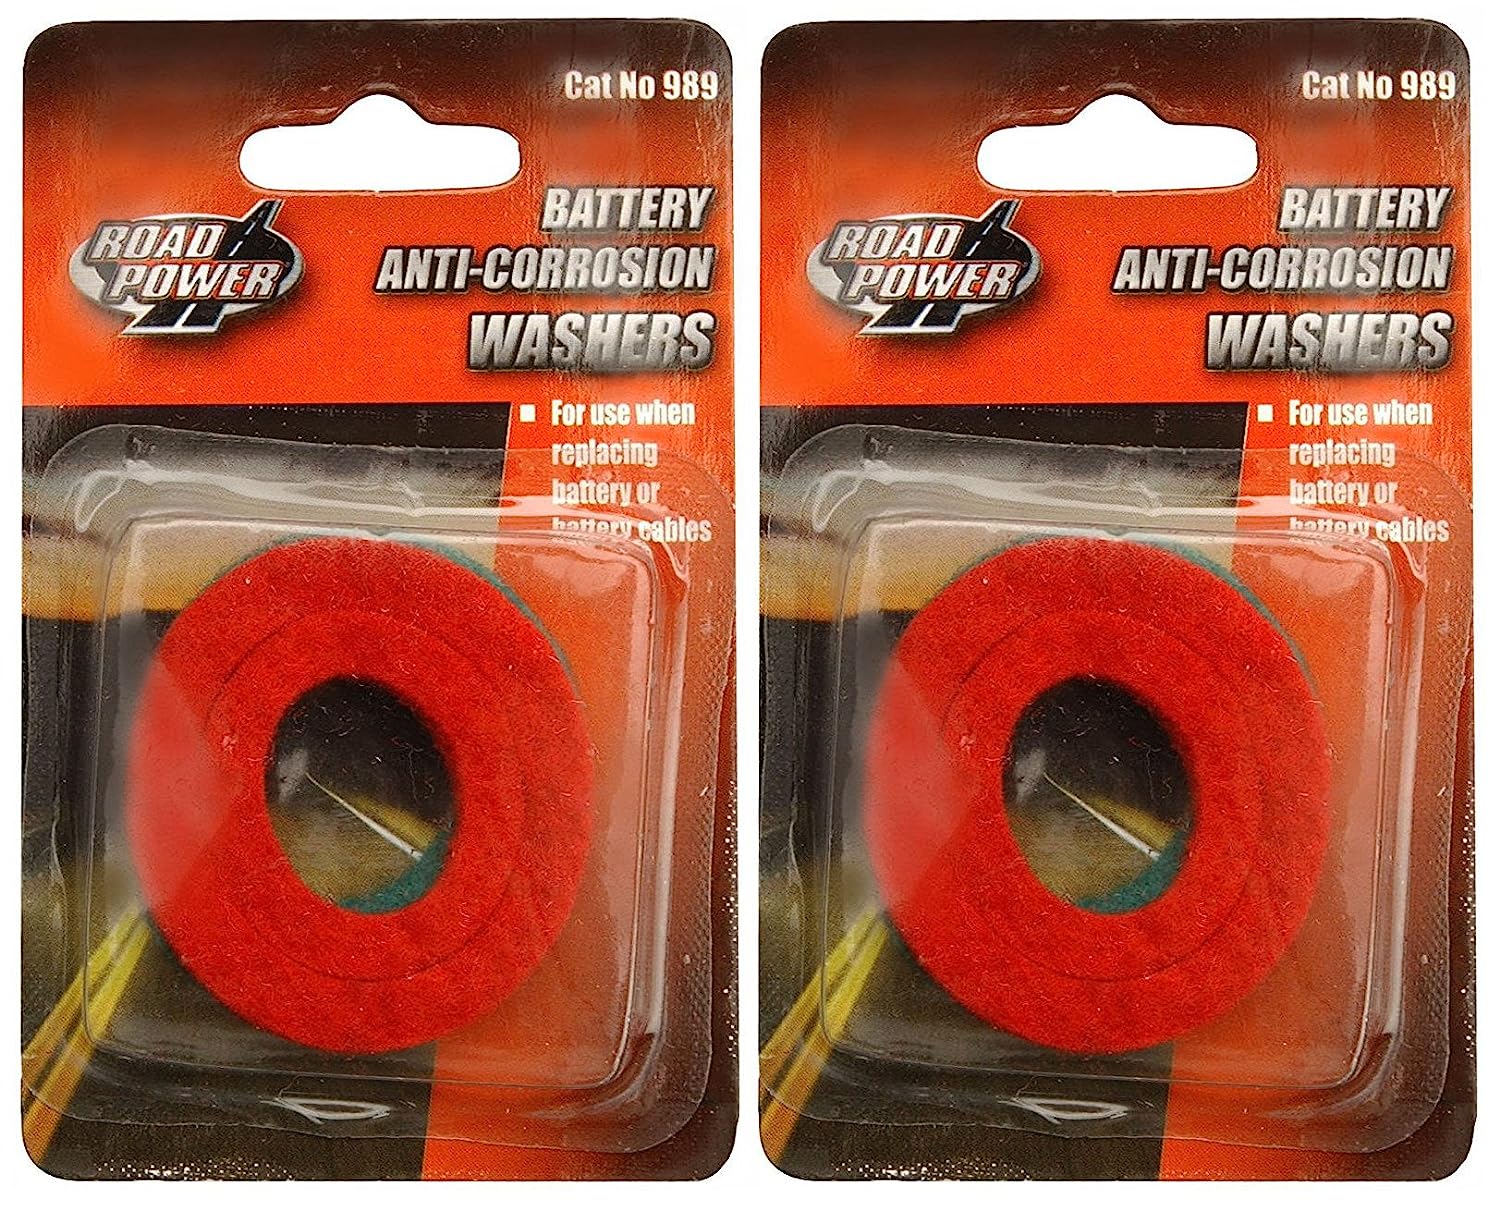 How Do Battery Anti Corrosion Washers Work